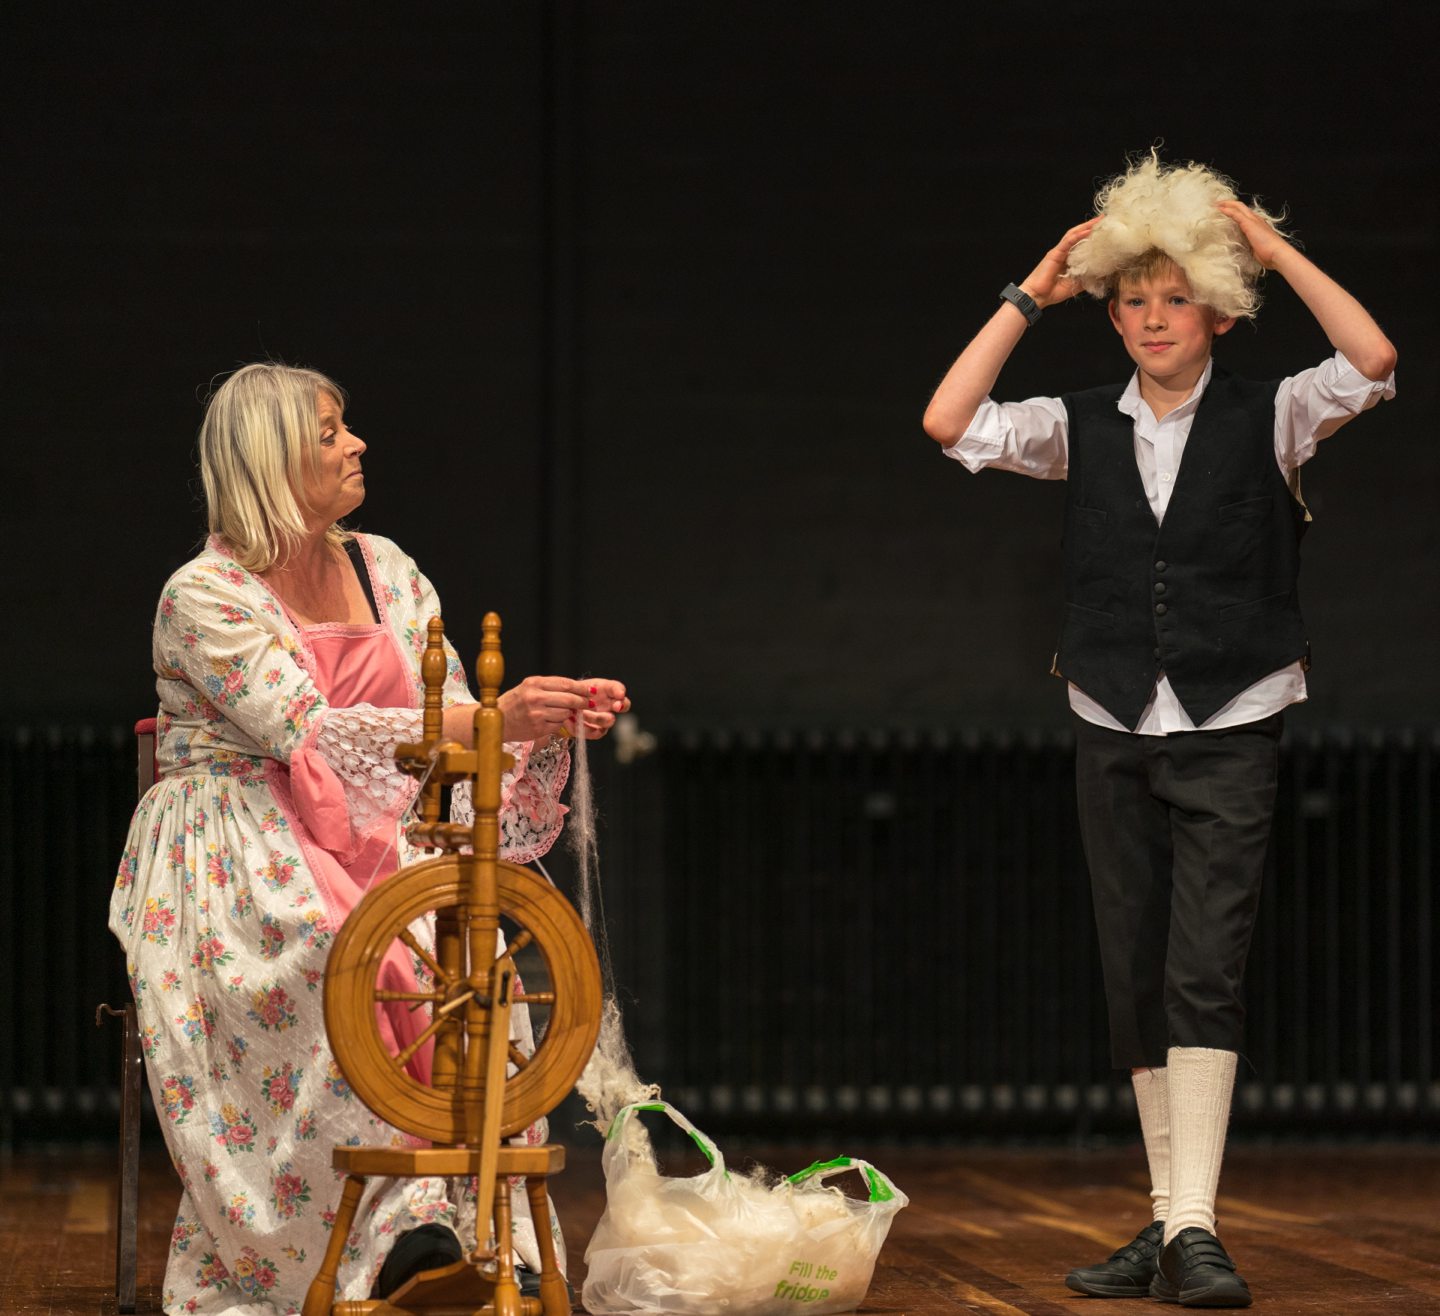 Stage show with woman at spinning wheel and boy putting on white wig. 